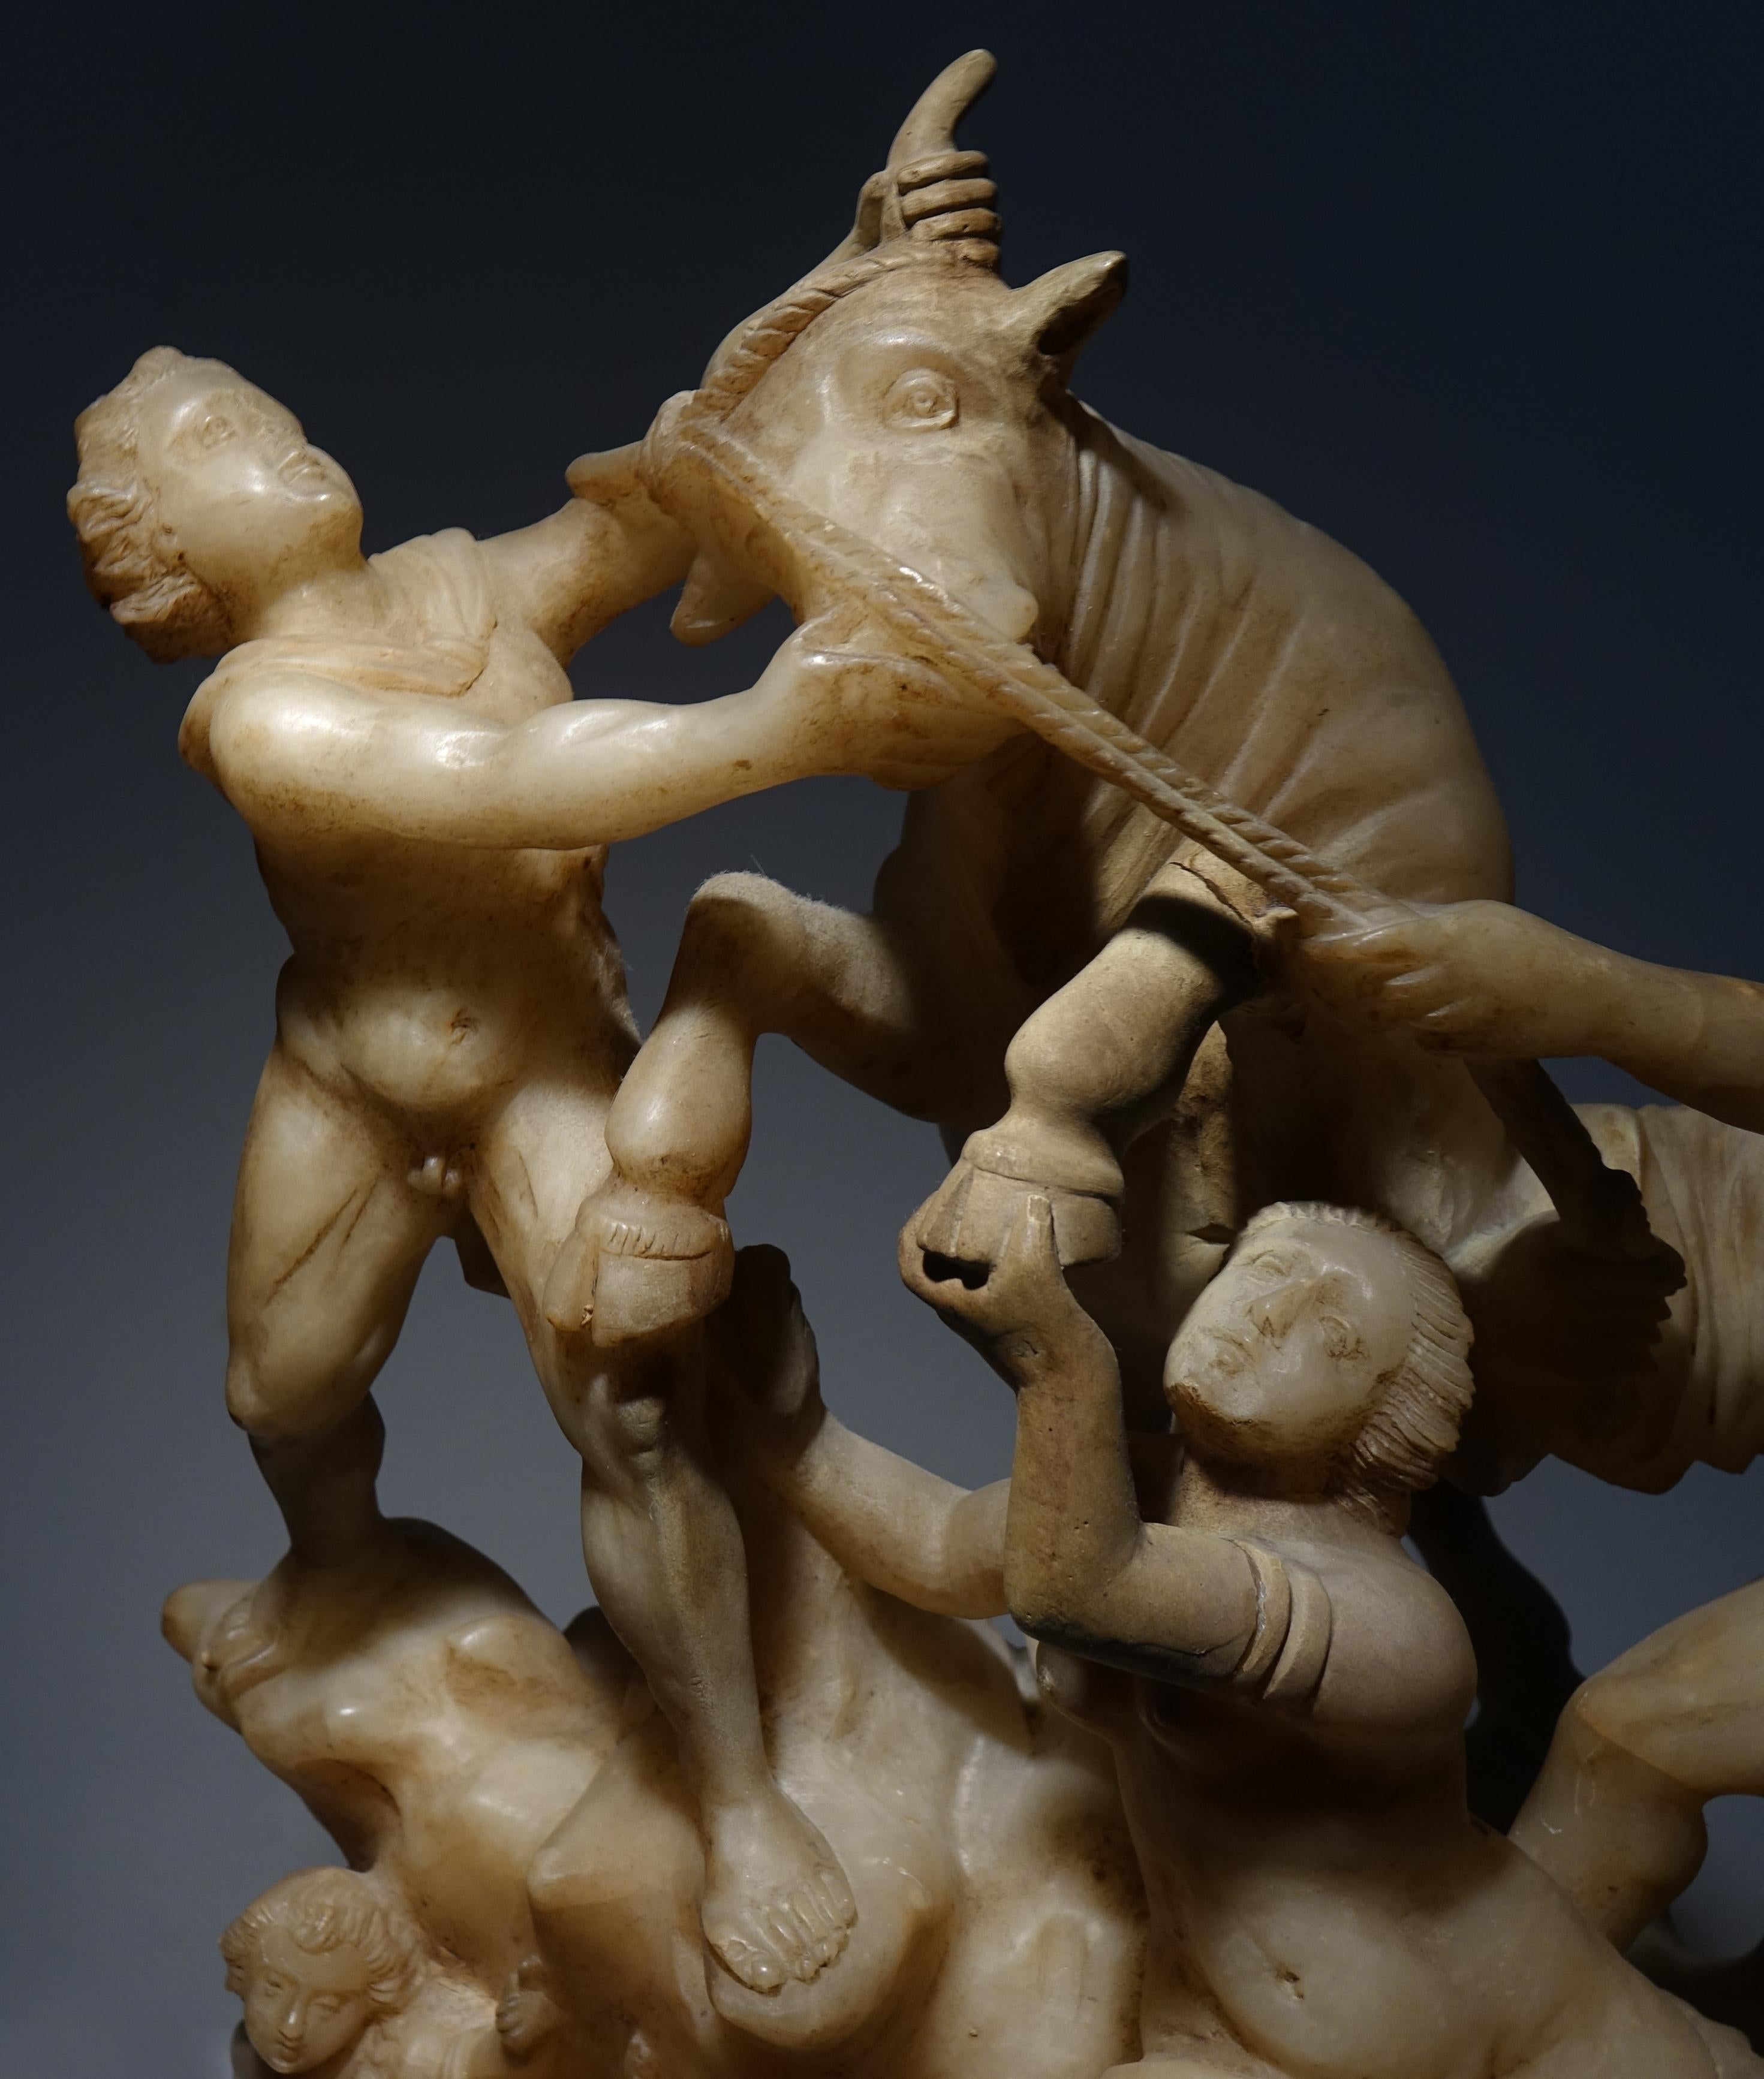 Carved 17th Century Figurative Sculptures Alabaster Farnese Bull 1600 Baroque Italy